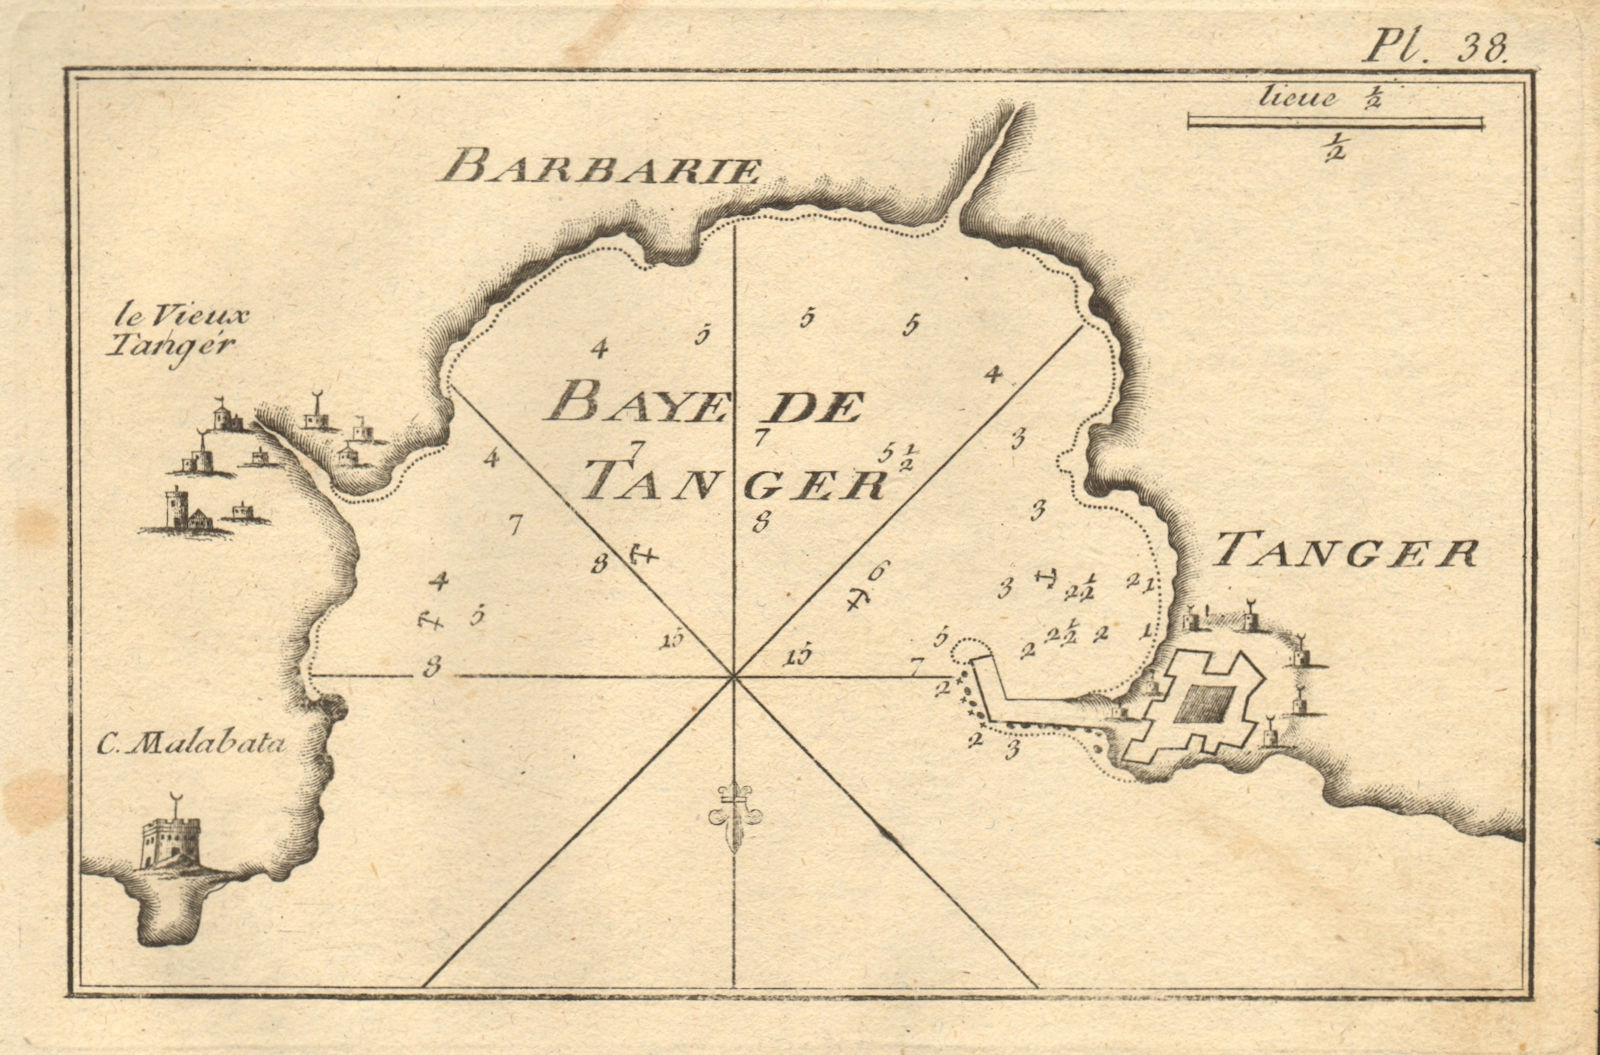 Associate Product Baye de Tanger (Barbarie). Plan of the Bay of Tangiers, Morocco. ROUX 1804 map